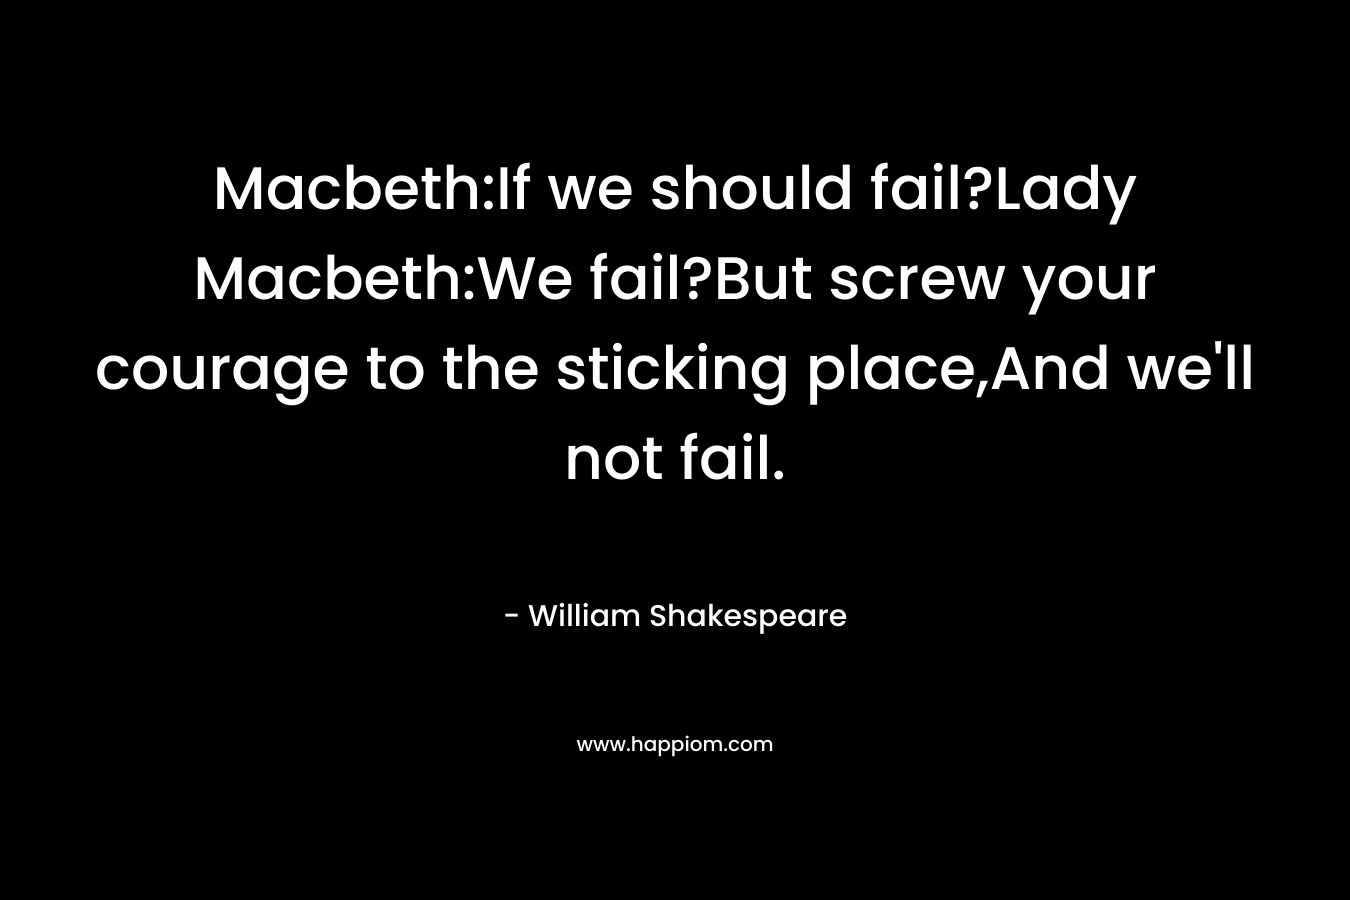 Macbeth:If we should fail?Lady Macbeth:We fail?But screw your courage to the sticking place,And we’ll not fail. – William Shakespeare